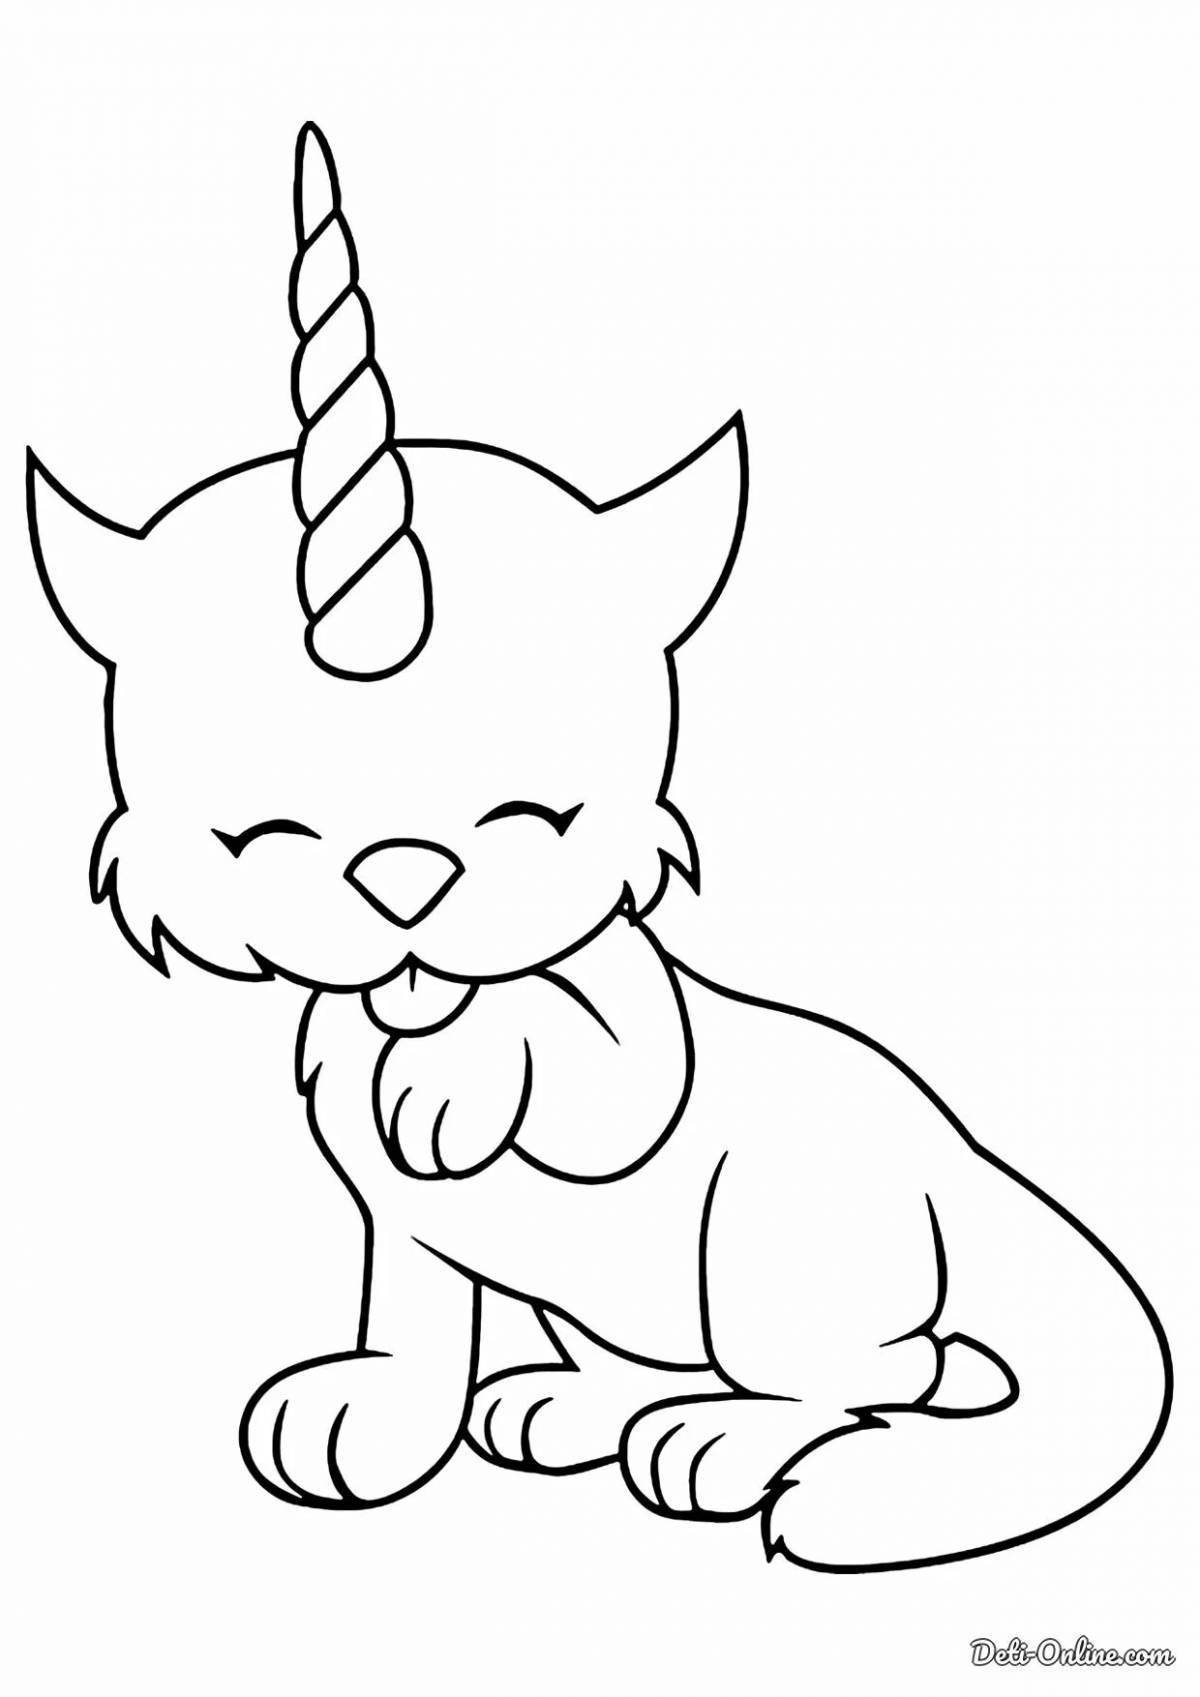 Gorgeous flying cat coloring page